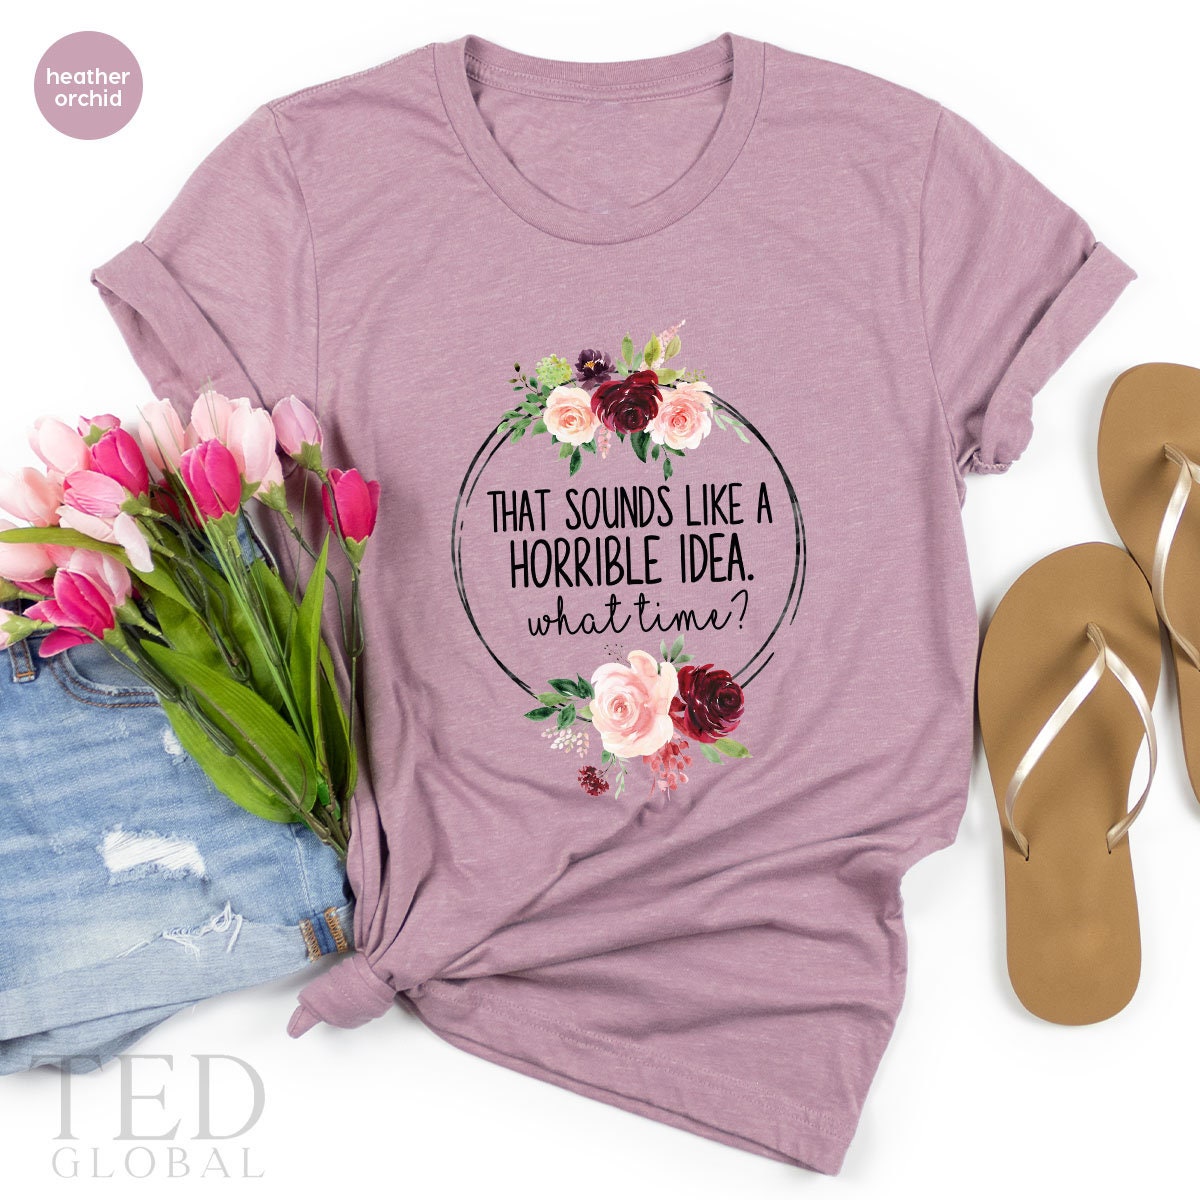 Cute Floral Shirt, That Sounds Like A Horrible İdea T Shirt, What Time? T Shirt, Funny Party Shirts, Sarcastic Tee, Cute Sarcasm Gift - Fastdeliverytees.com